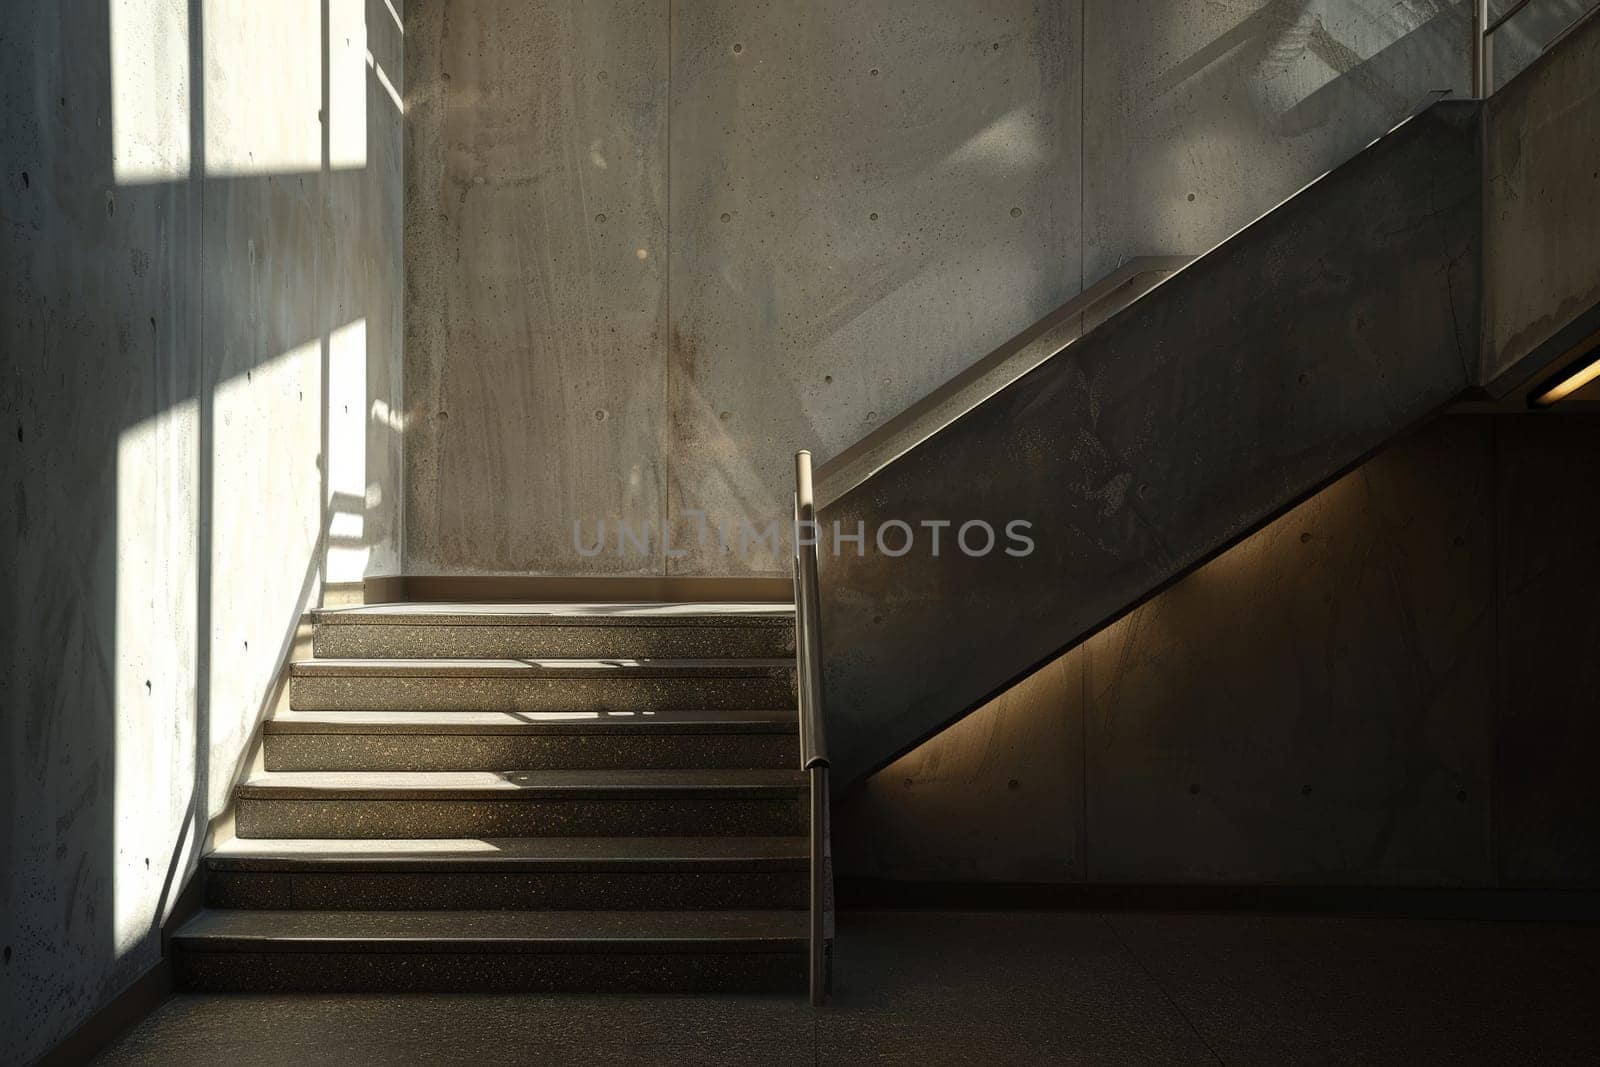 Lighting effects of staircases in public buildings, abstract simple stairs by nijieimu